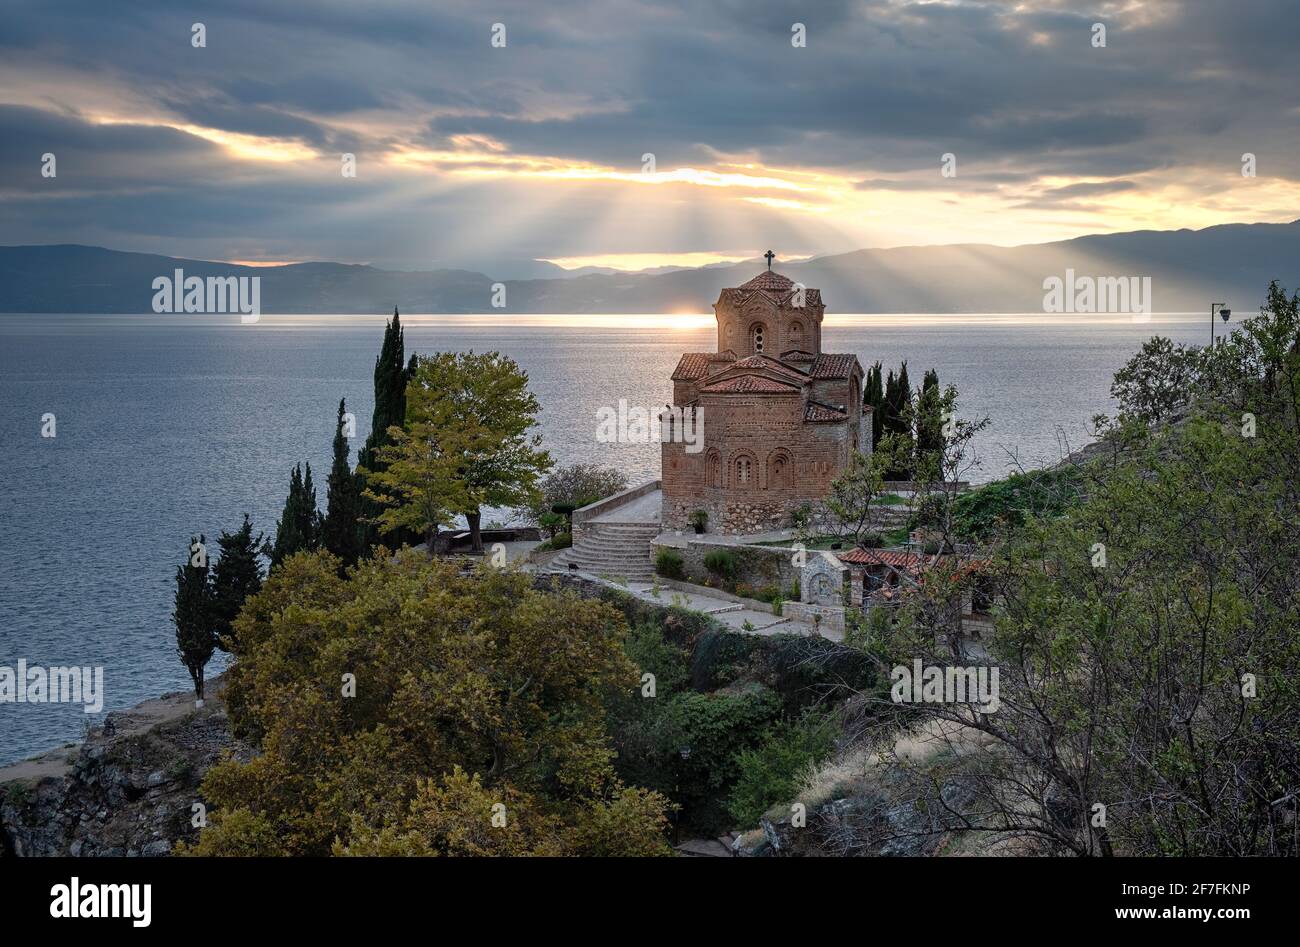 Sunset at Saint John at Kaneo, an Orthodox church situated on the cliff overlooking Lake Ohrid, UNESCO World Heritage Site, Ohrid, North Macedonia Stock Photo